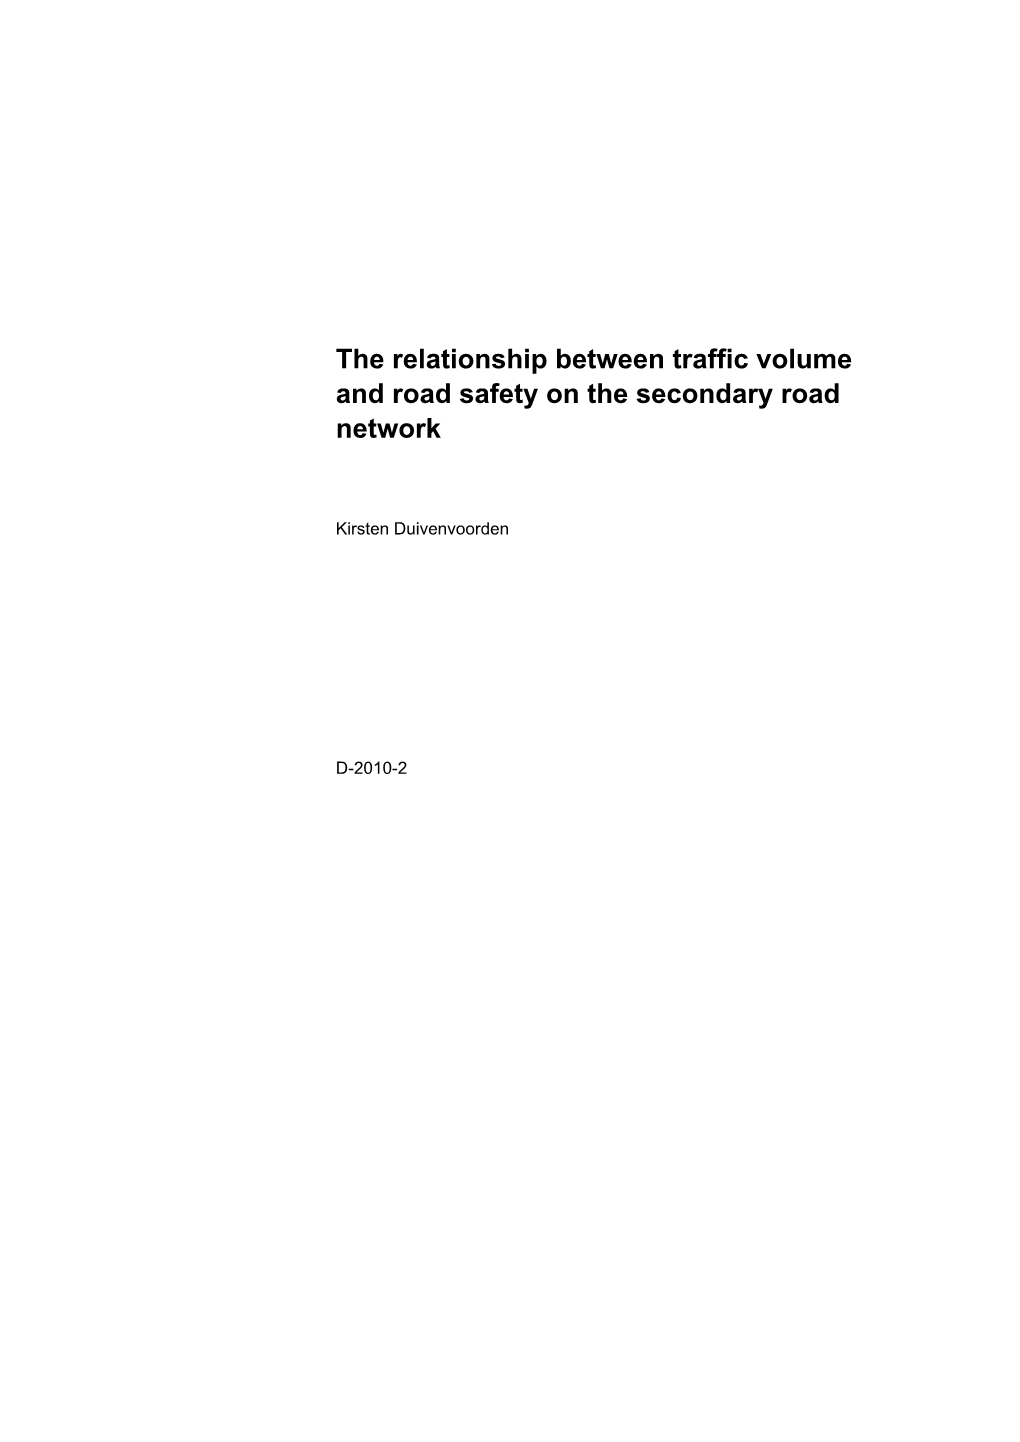 The Relationship Between Traffic Volume and Road Safety on the Secondary Road Network